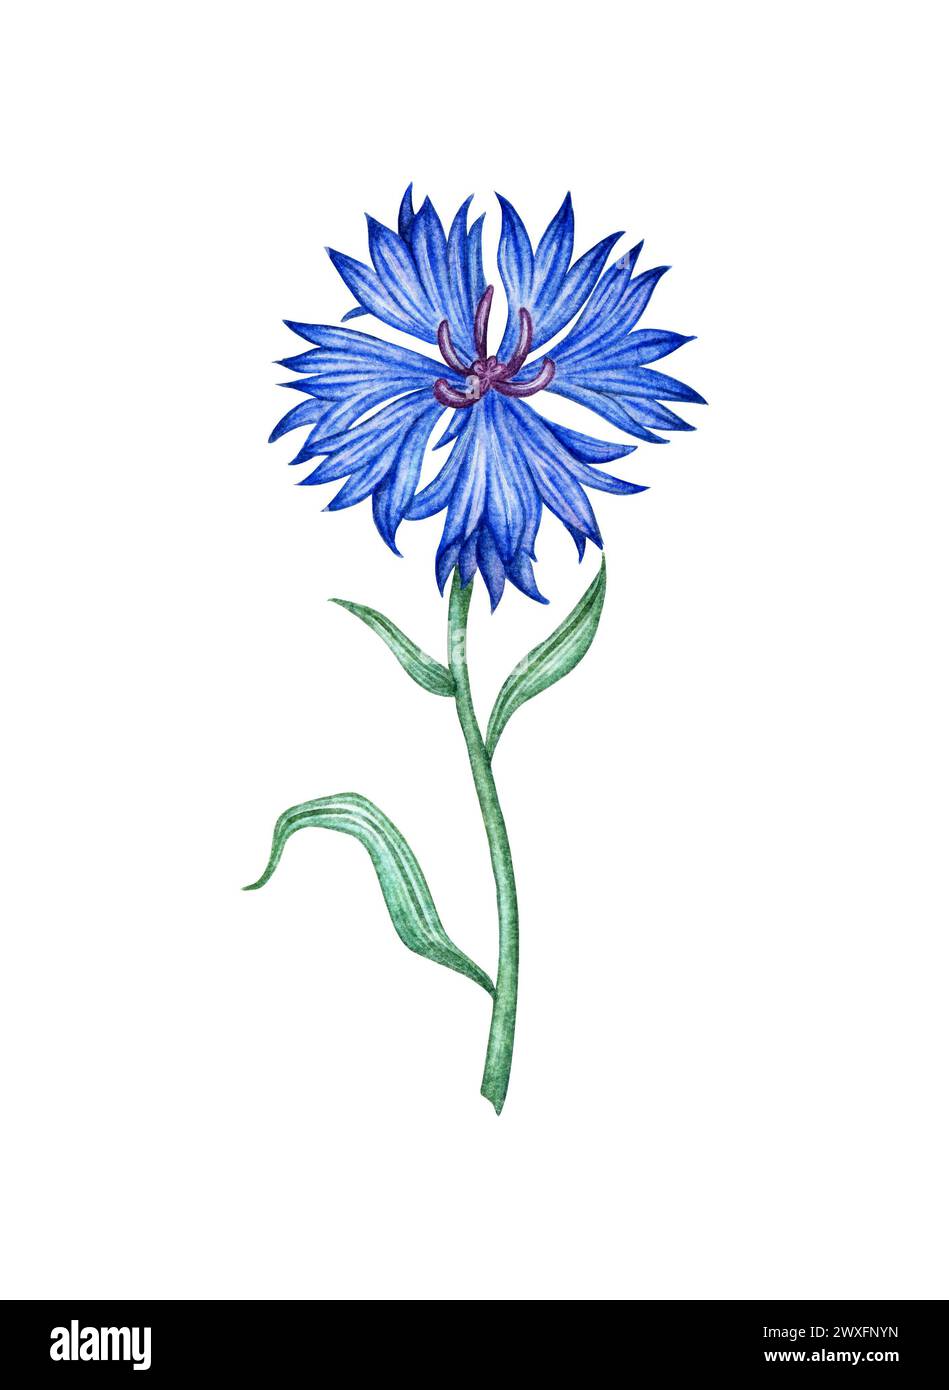 Watercolor illustration of blue cornflower flower. Botanical composition element isolated from background. Suitable for cosmetics, aromatherapy, medic Stock Photo